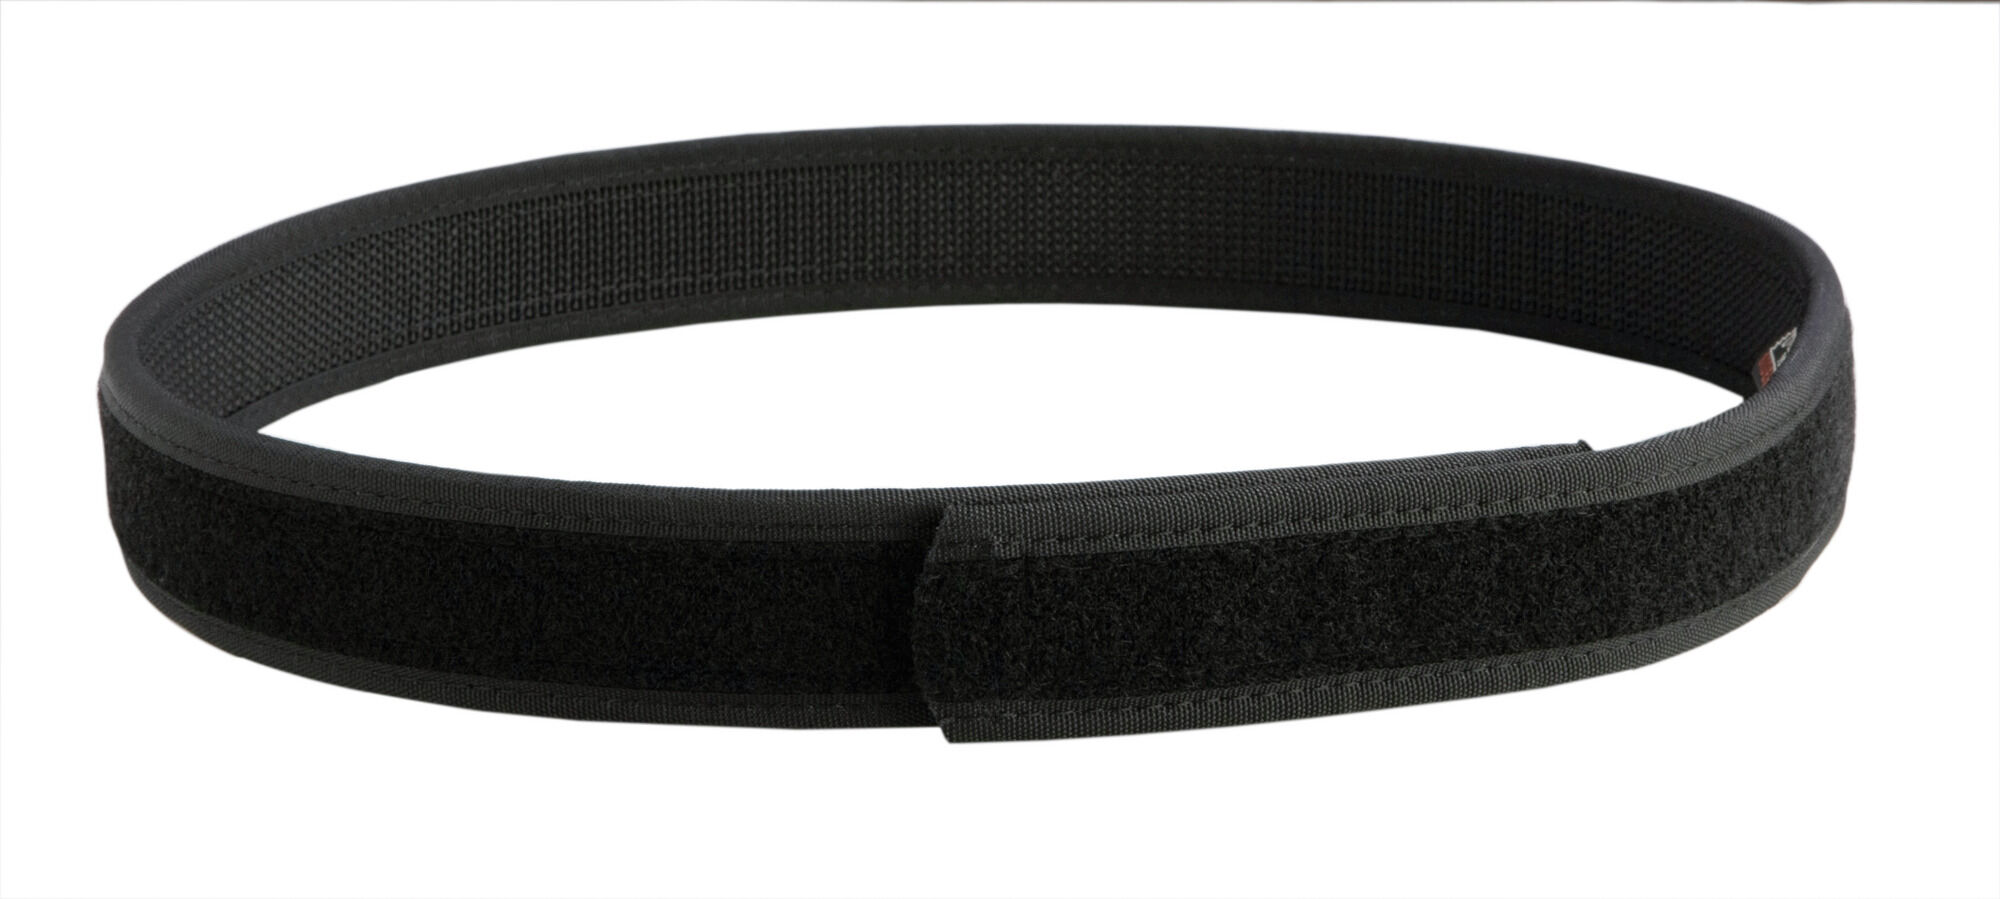 SuperBelt! Black Tactical Police Duty Belt Comes w/ All Attachments Shown! 